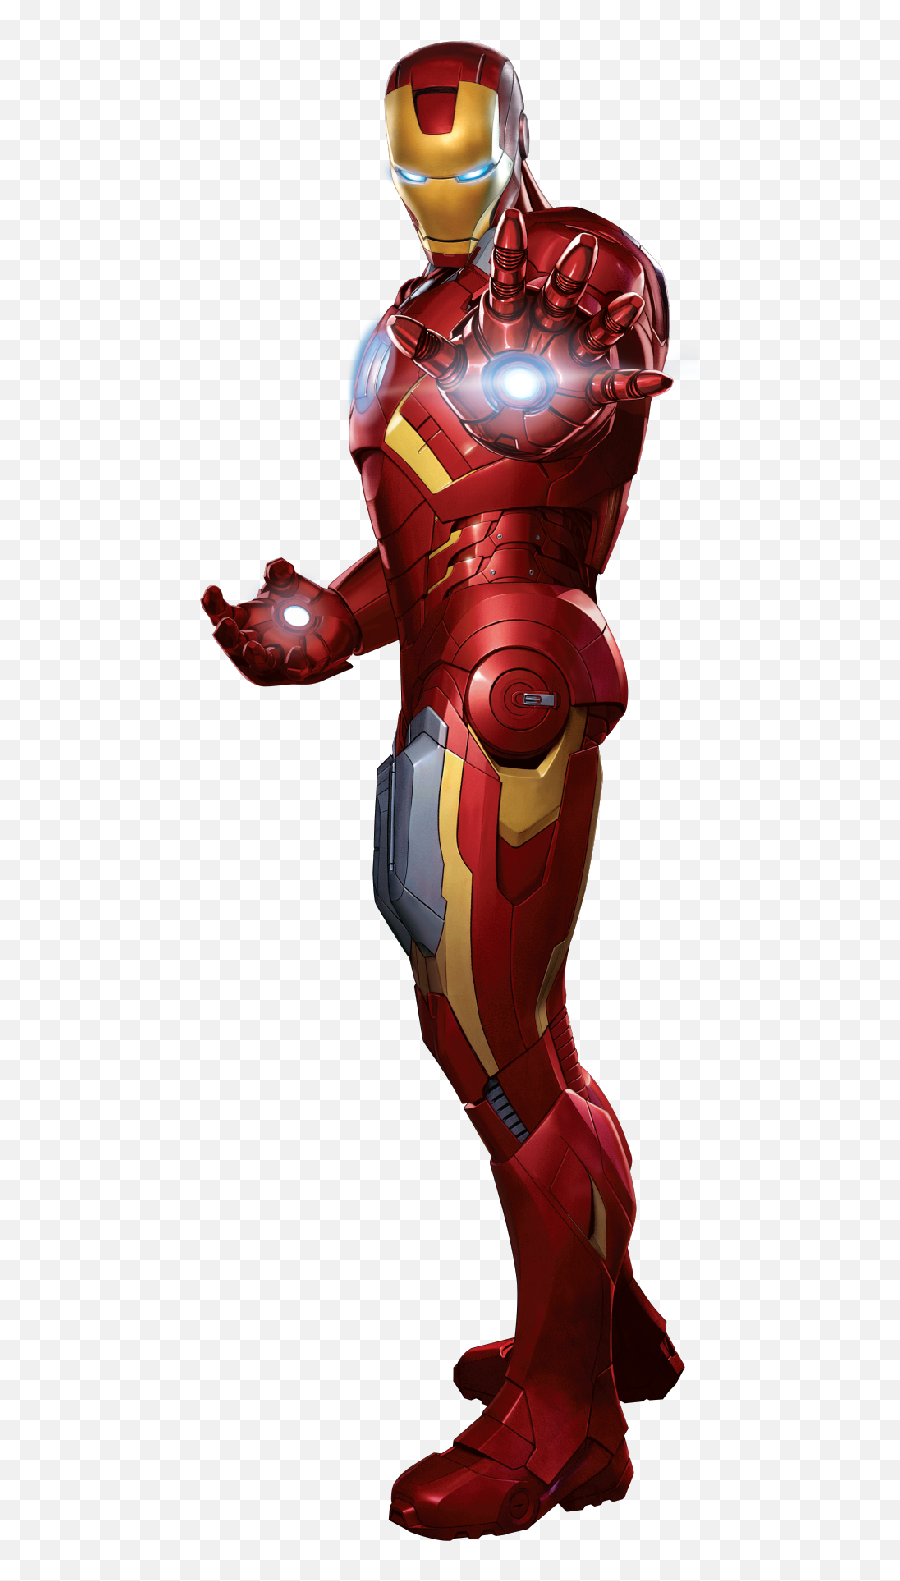 Download Ironman Avengers Png Image For Free - Transparent Iron Man Png,Avengers Png